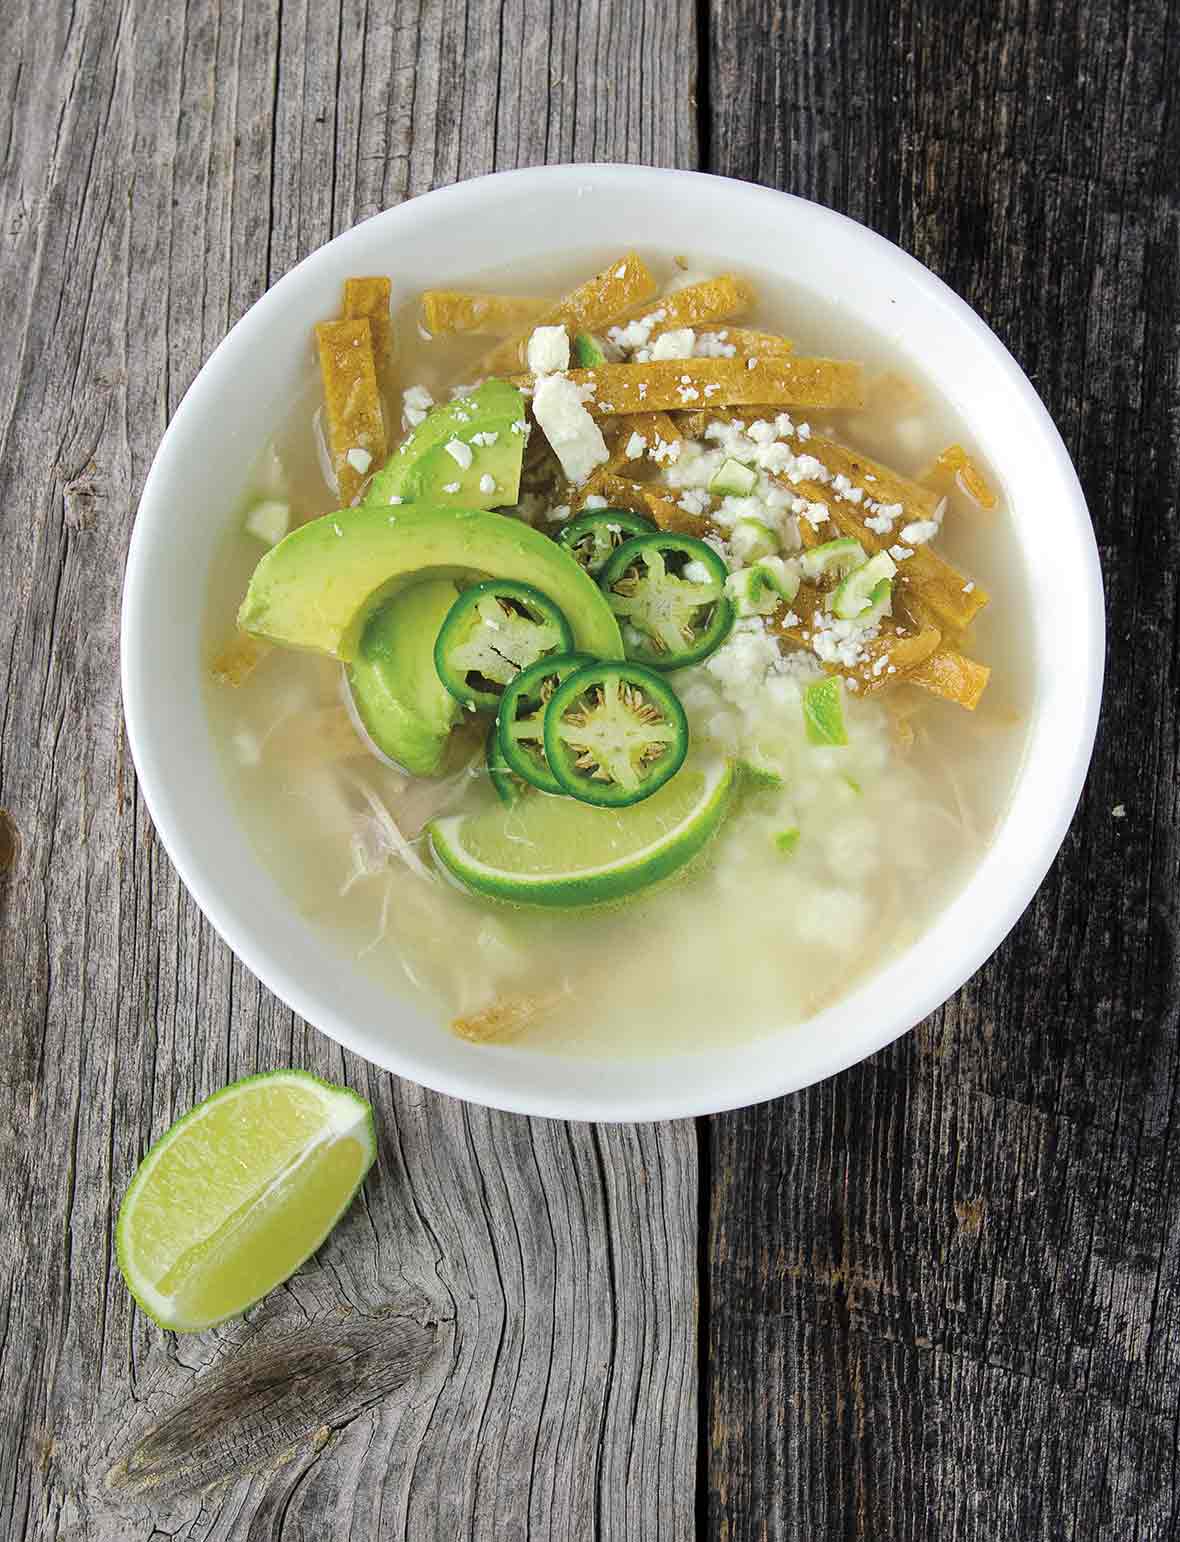 A white bowl filled with Mexican chicken soup, with fried tortilla strips, avocado slices, jalapeno slices, and cotija cheese, and a lime wedge on the side.